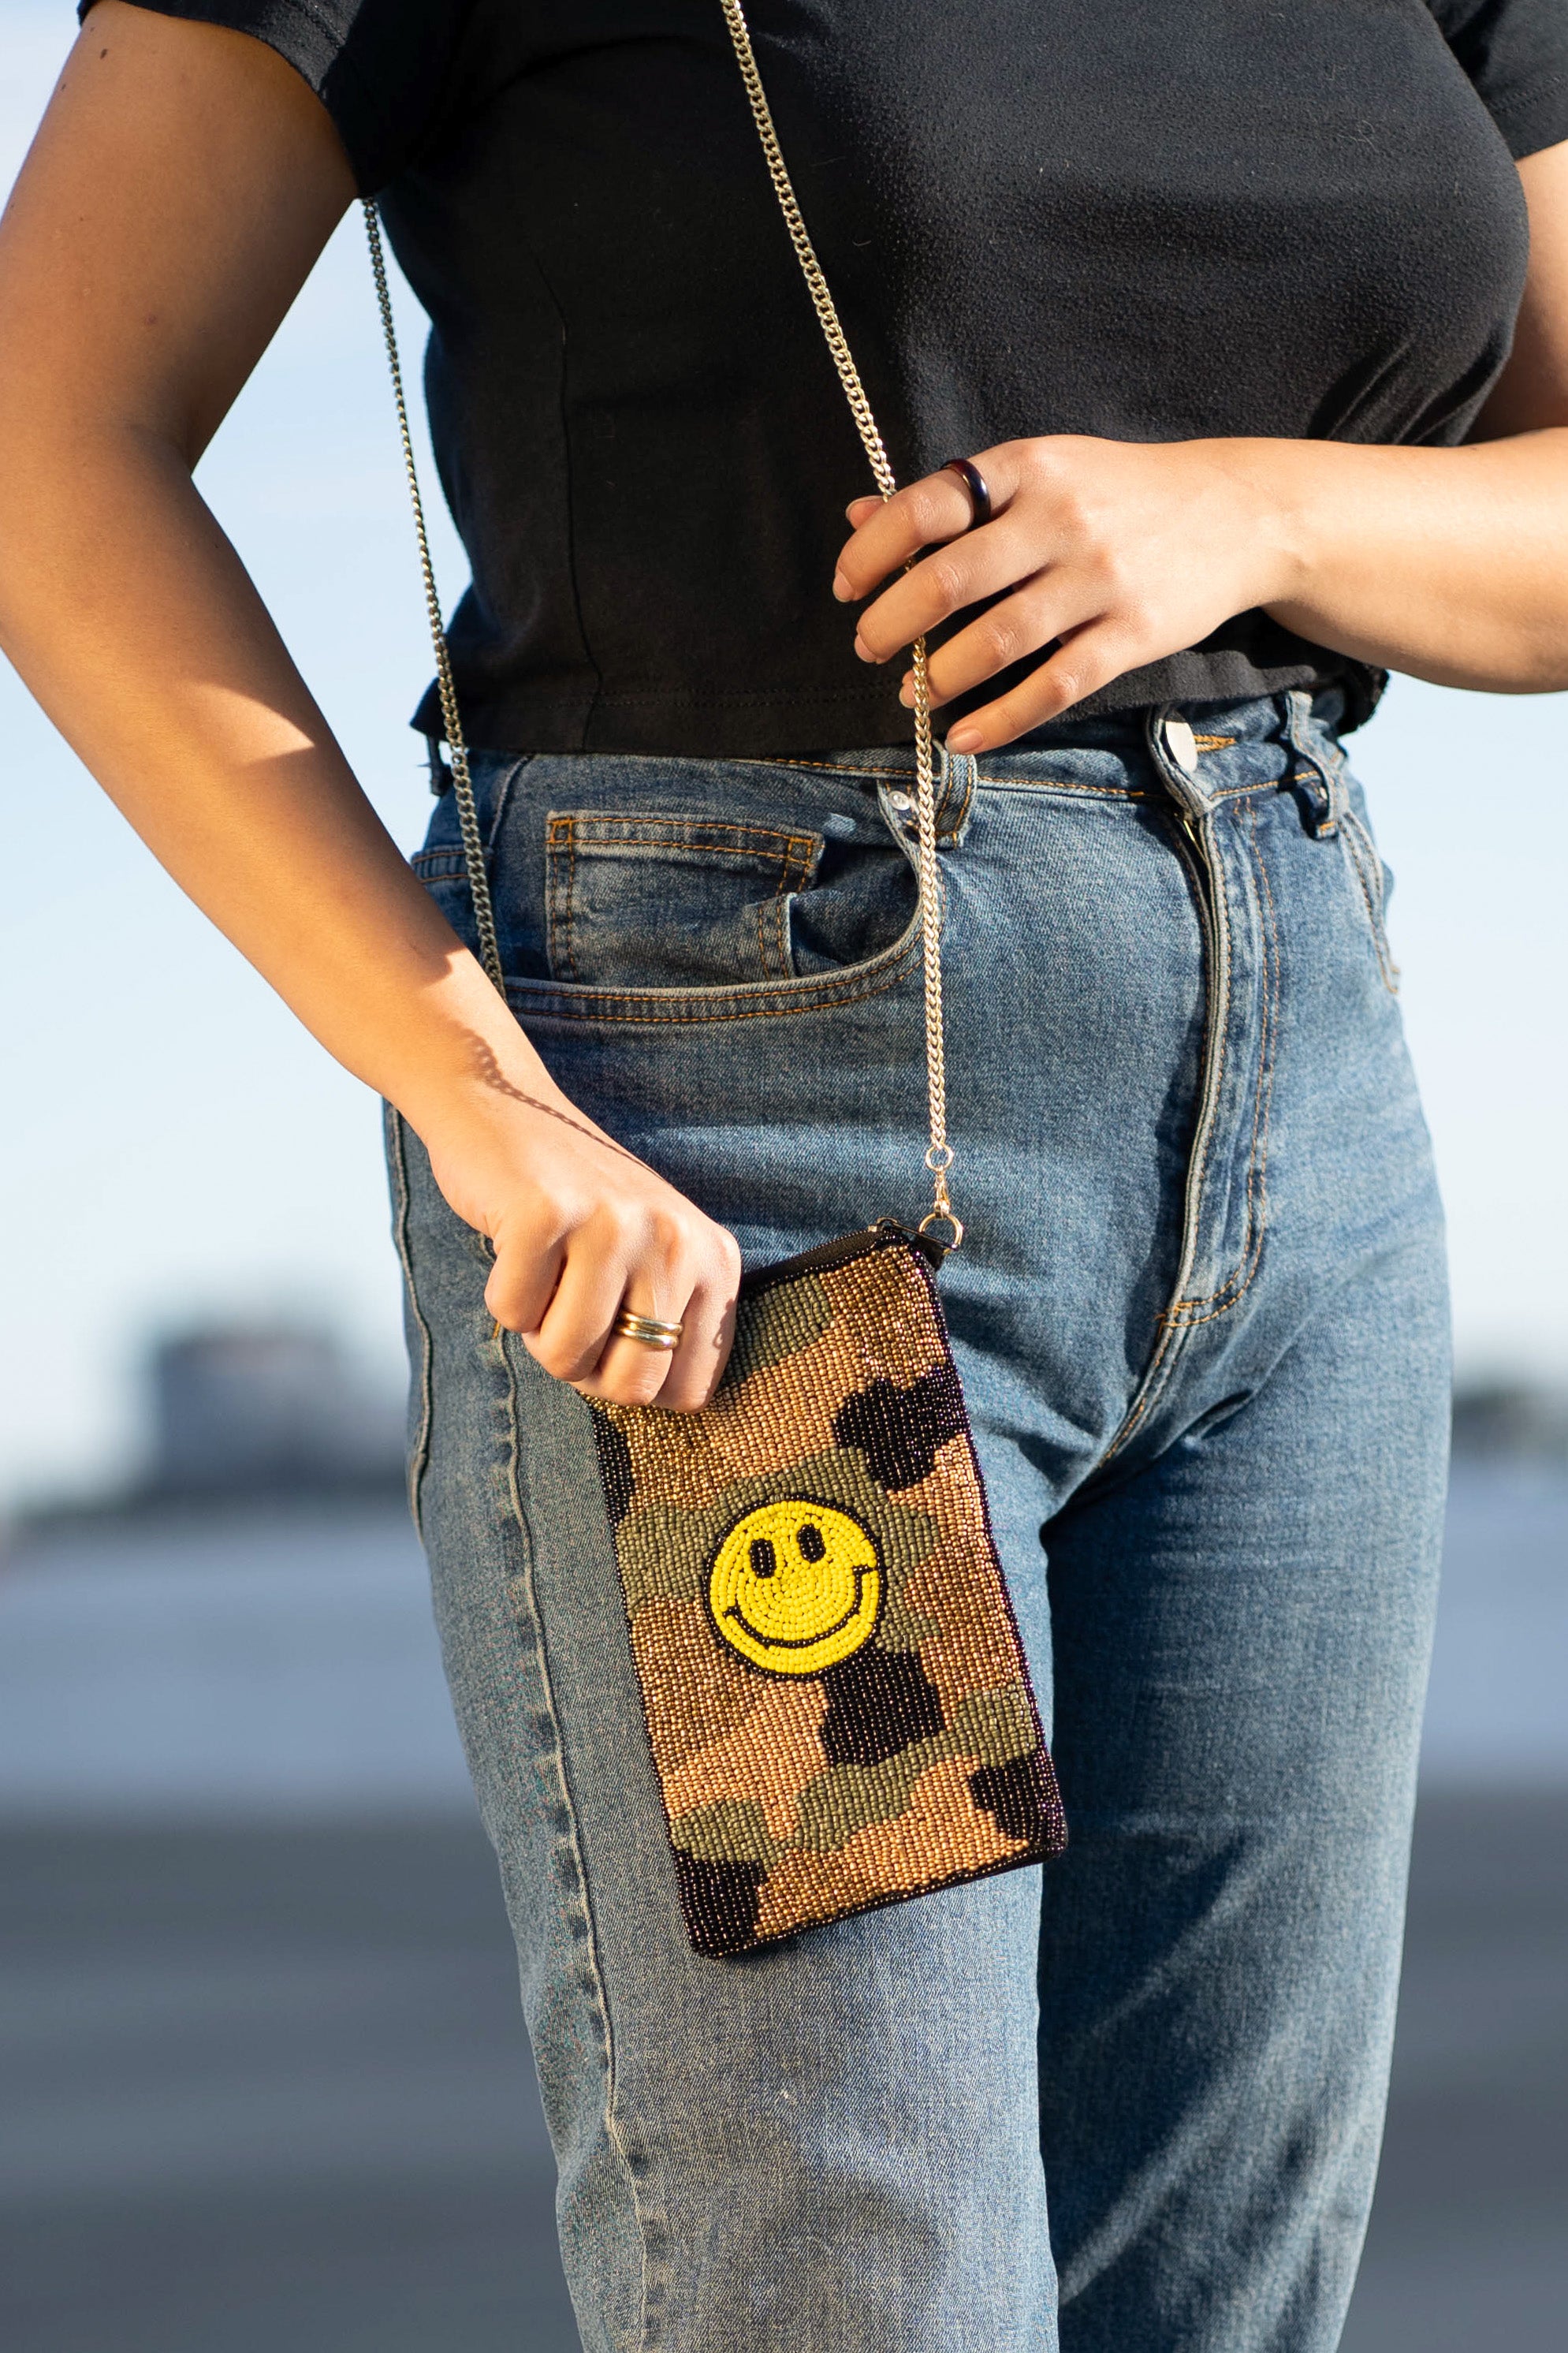 Deal of the Day: 25 percent off handmade camouflage mini purses from Moyna